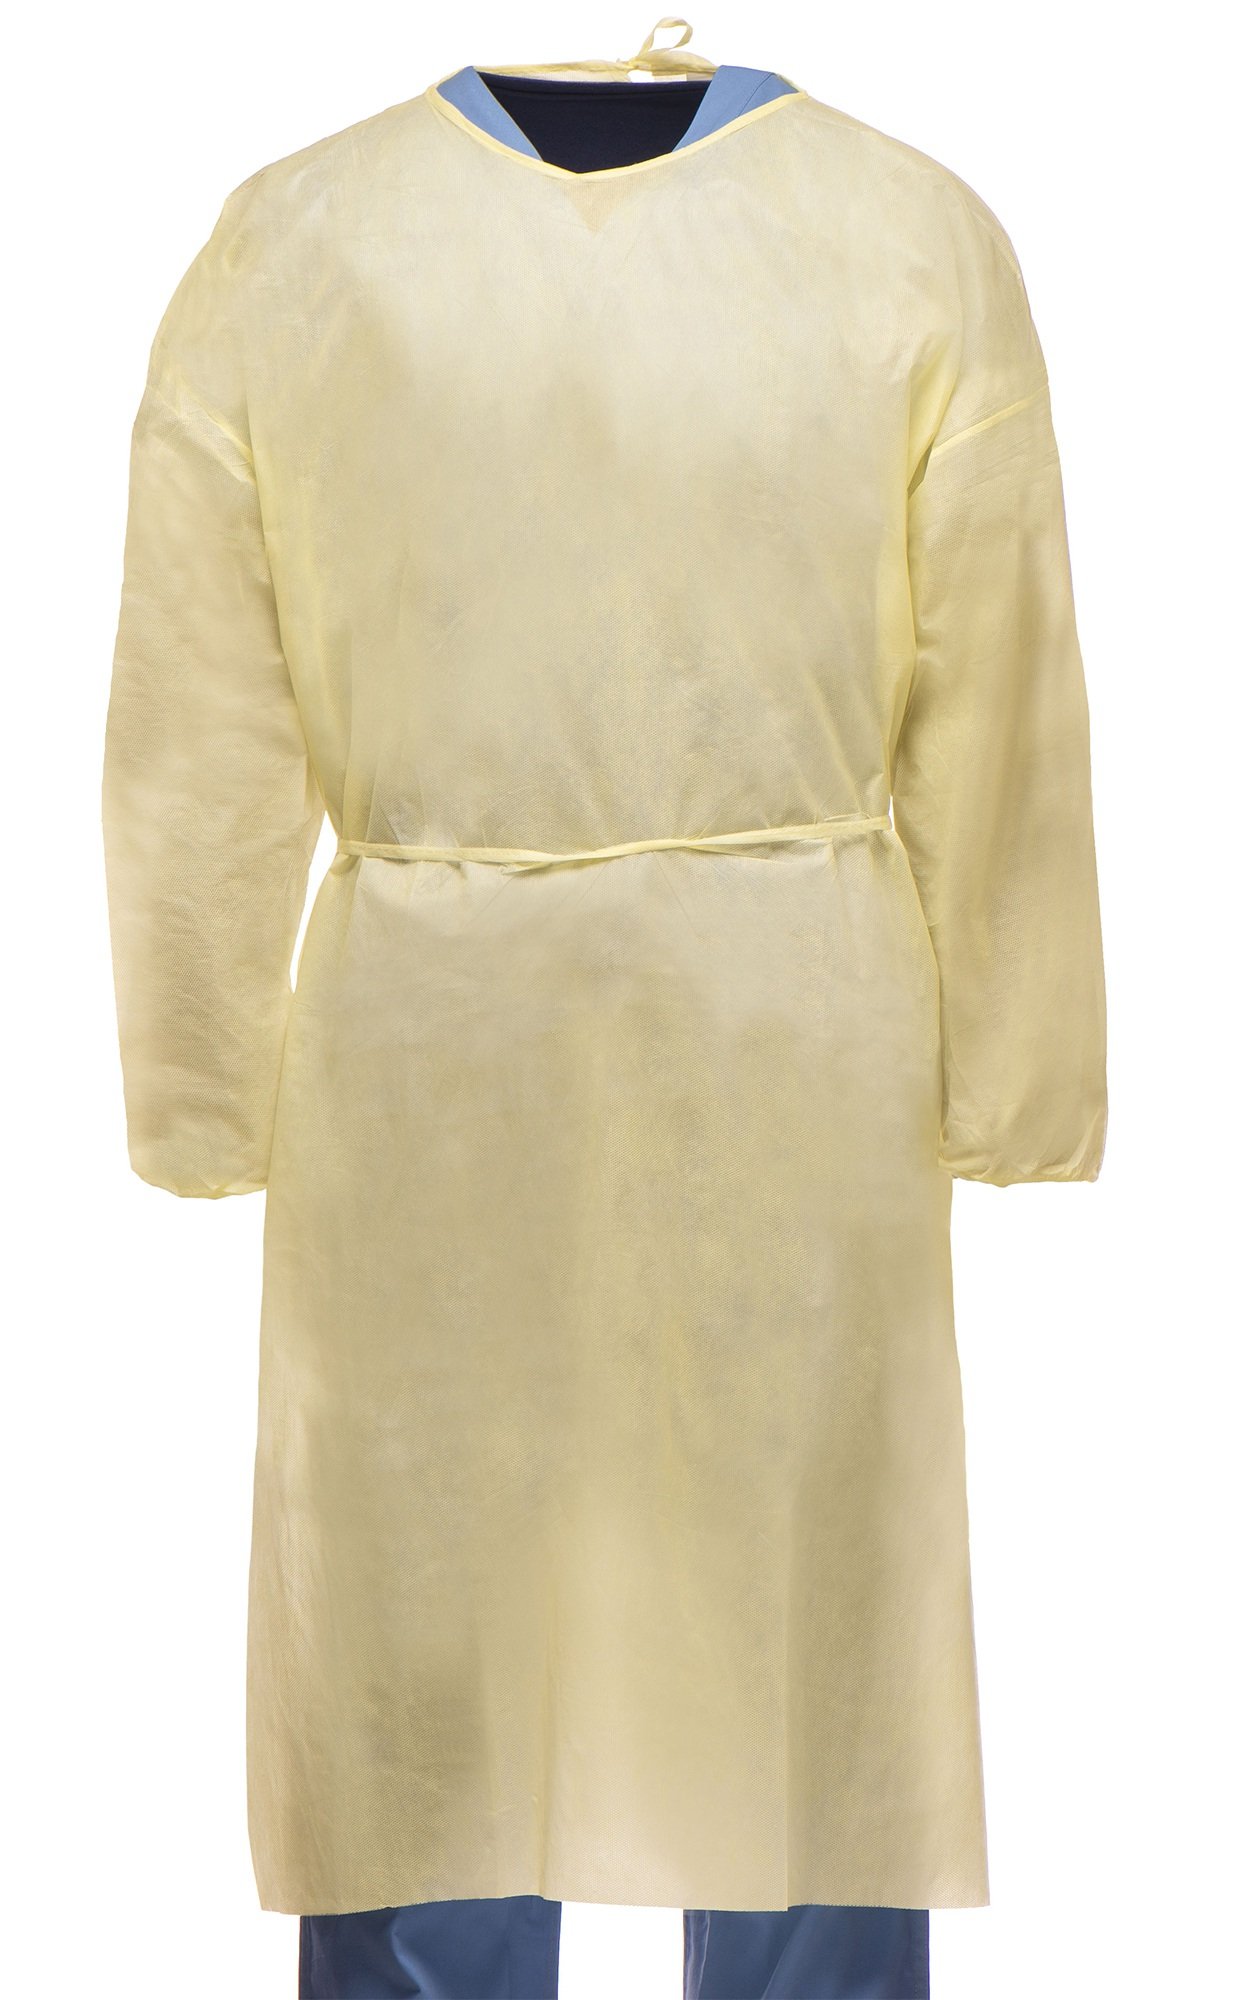 Yellow disposable non woven isolation gown for hospital use from China  manufacturer  Pidegree Medical